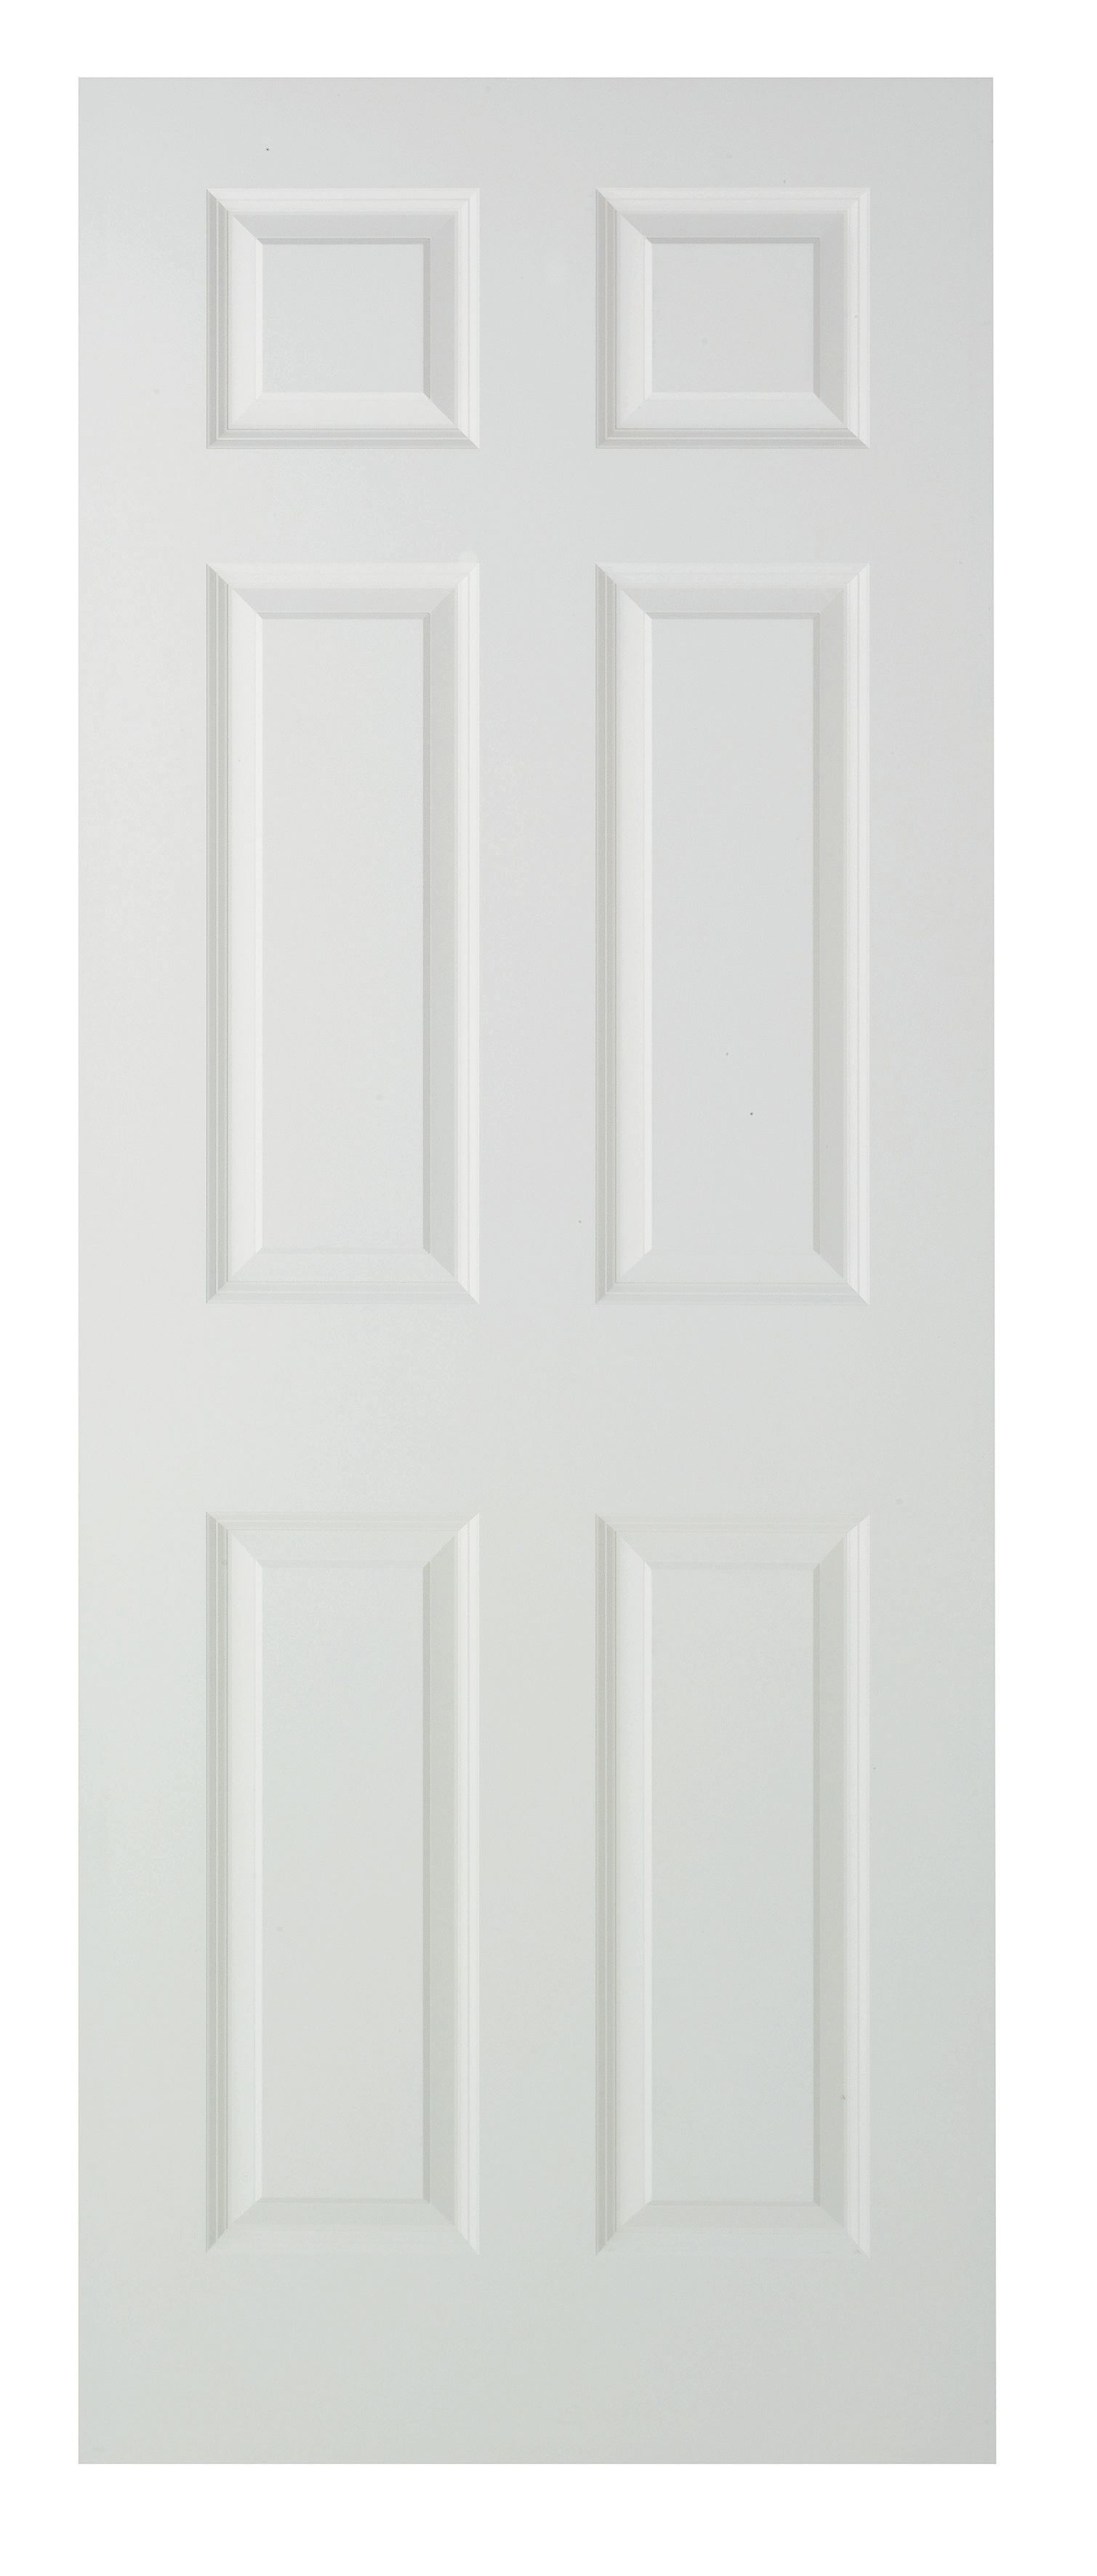 Wickes Woburn White Grained Moulded 6 Panel Internal Fire Door - 2040mm x 926mm